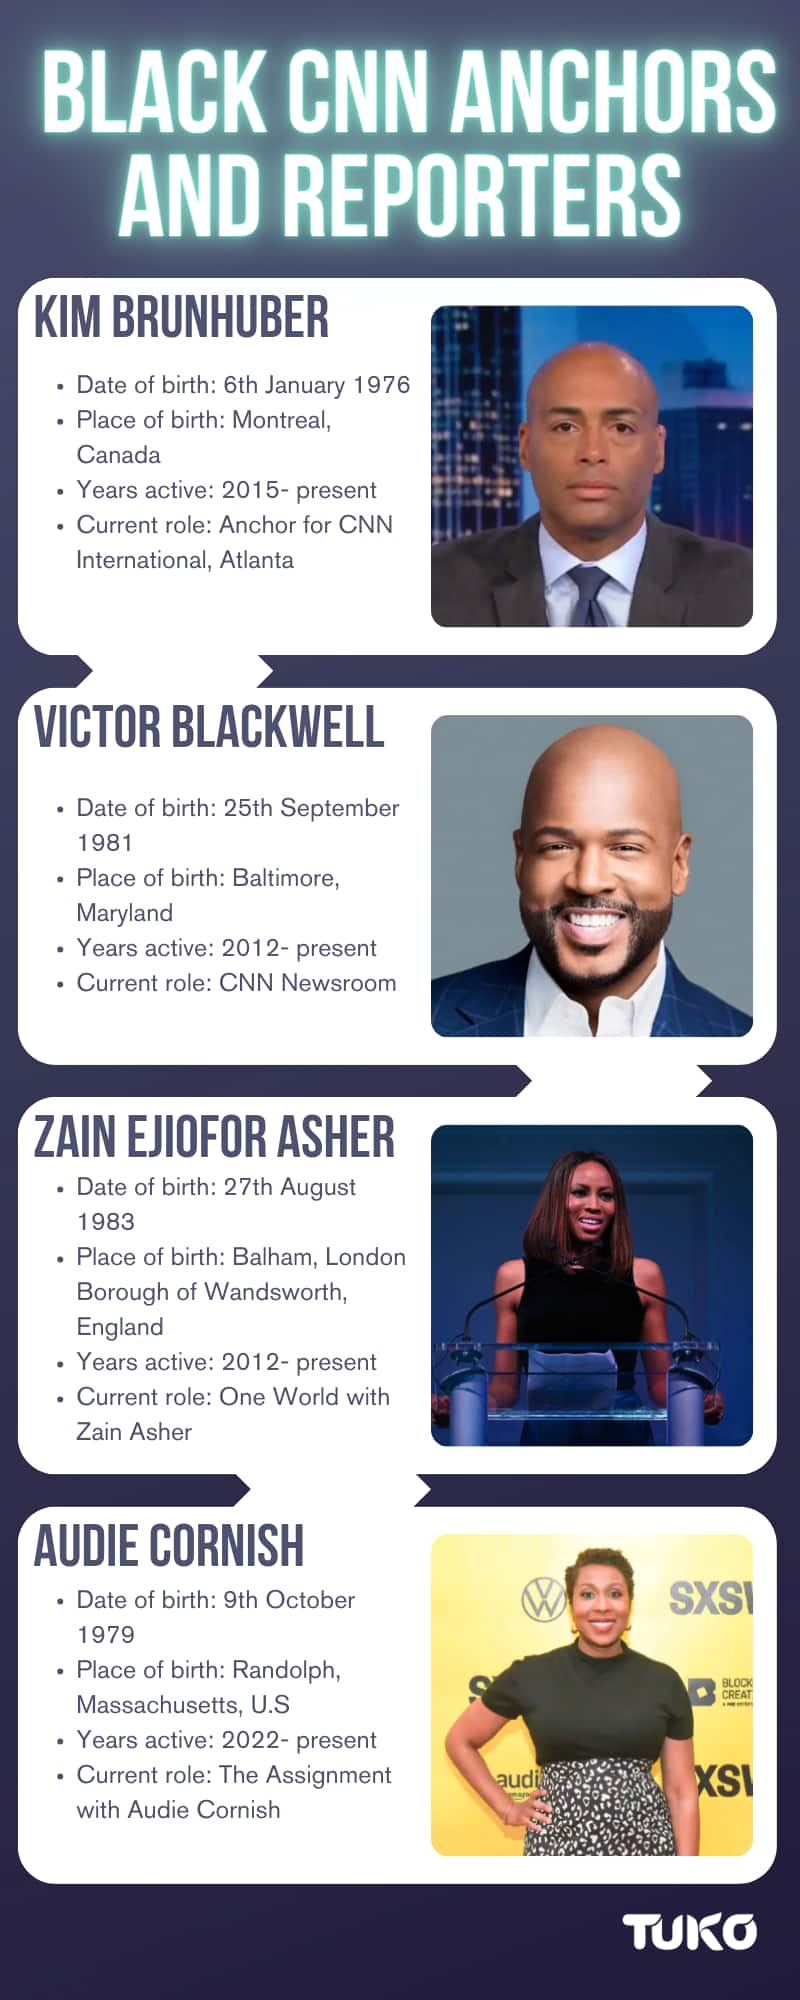 List of all black CNN anchors and reporters